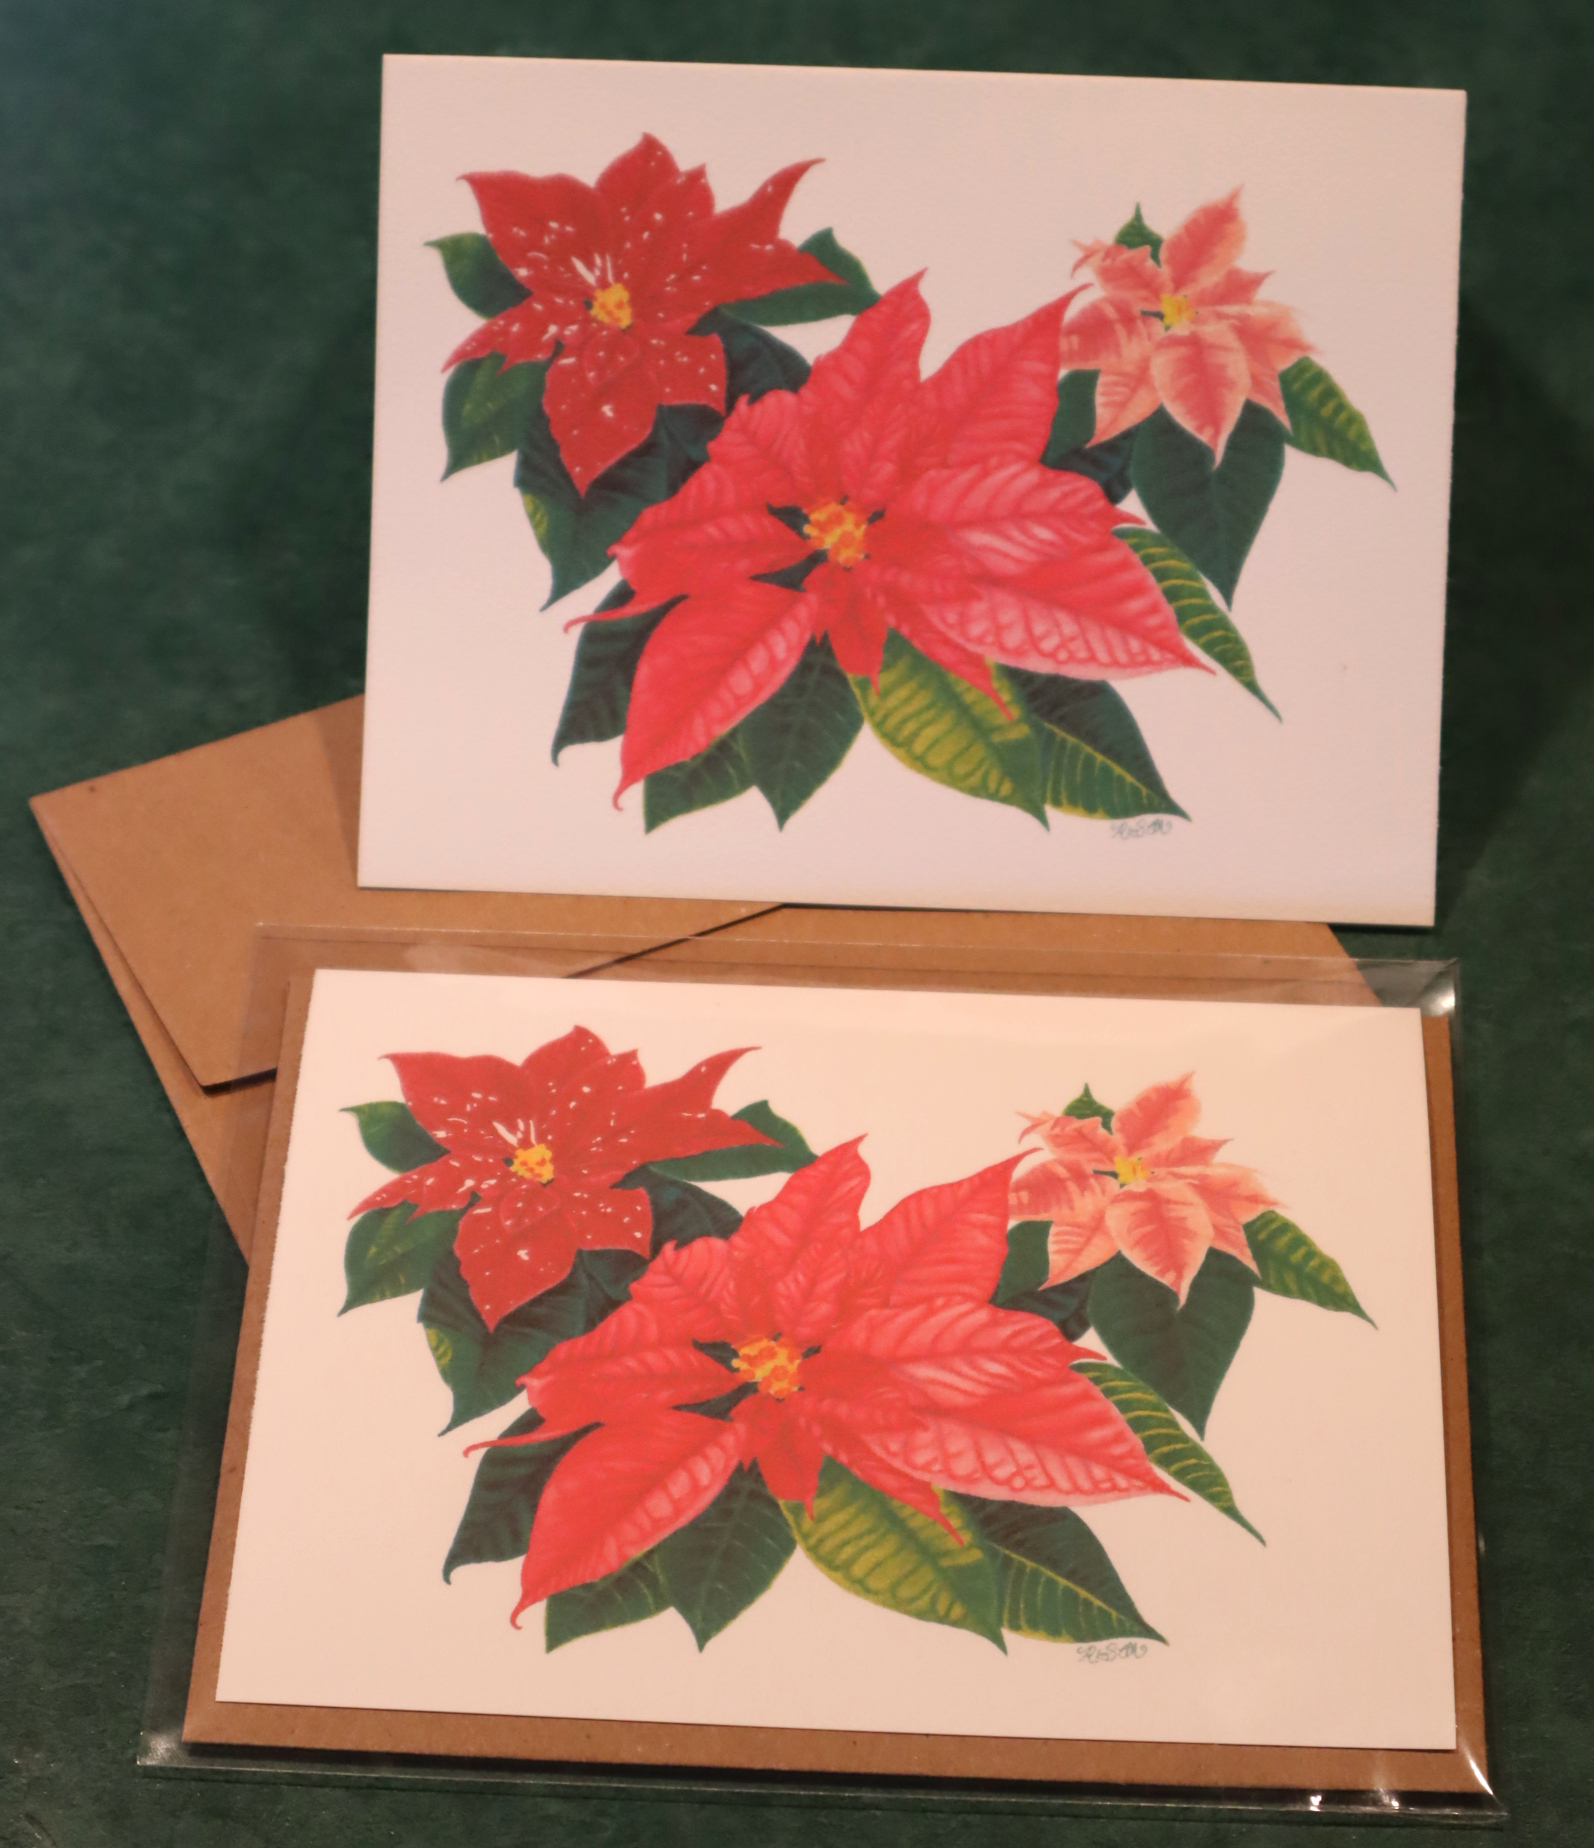 Three red, pink, and cream poinsettias with dark green leaves